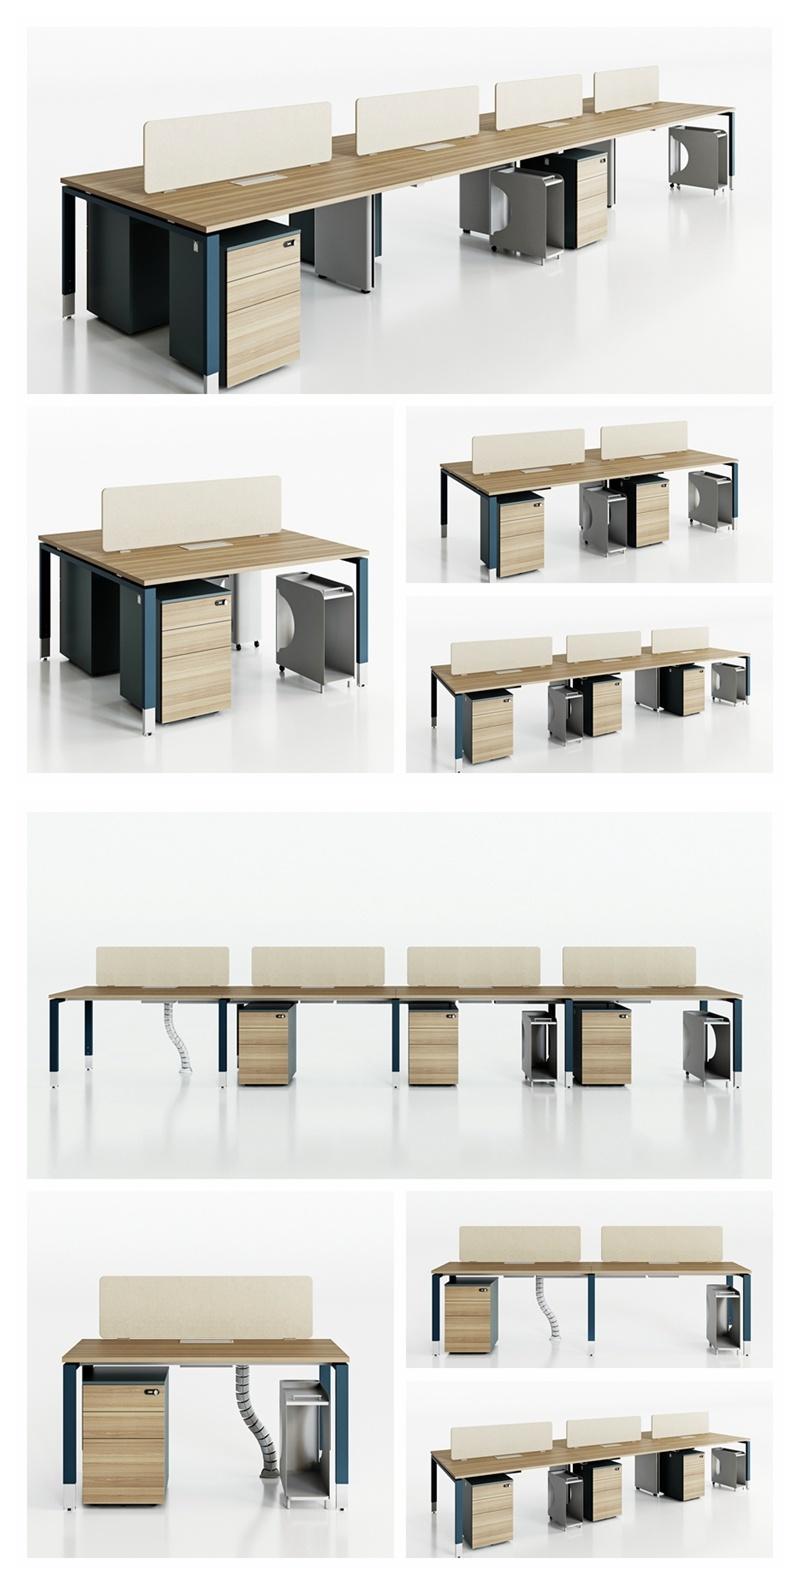 Manufacture Extendable Office Station Staff Work Space Workstation Office Desk Furniture